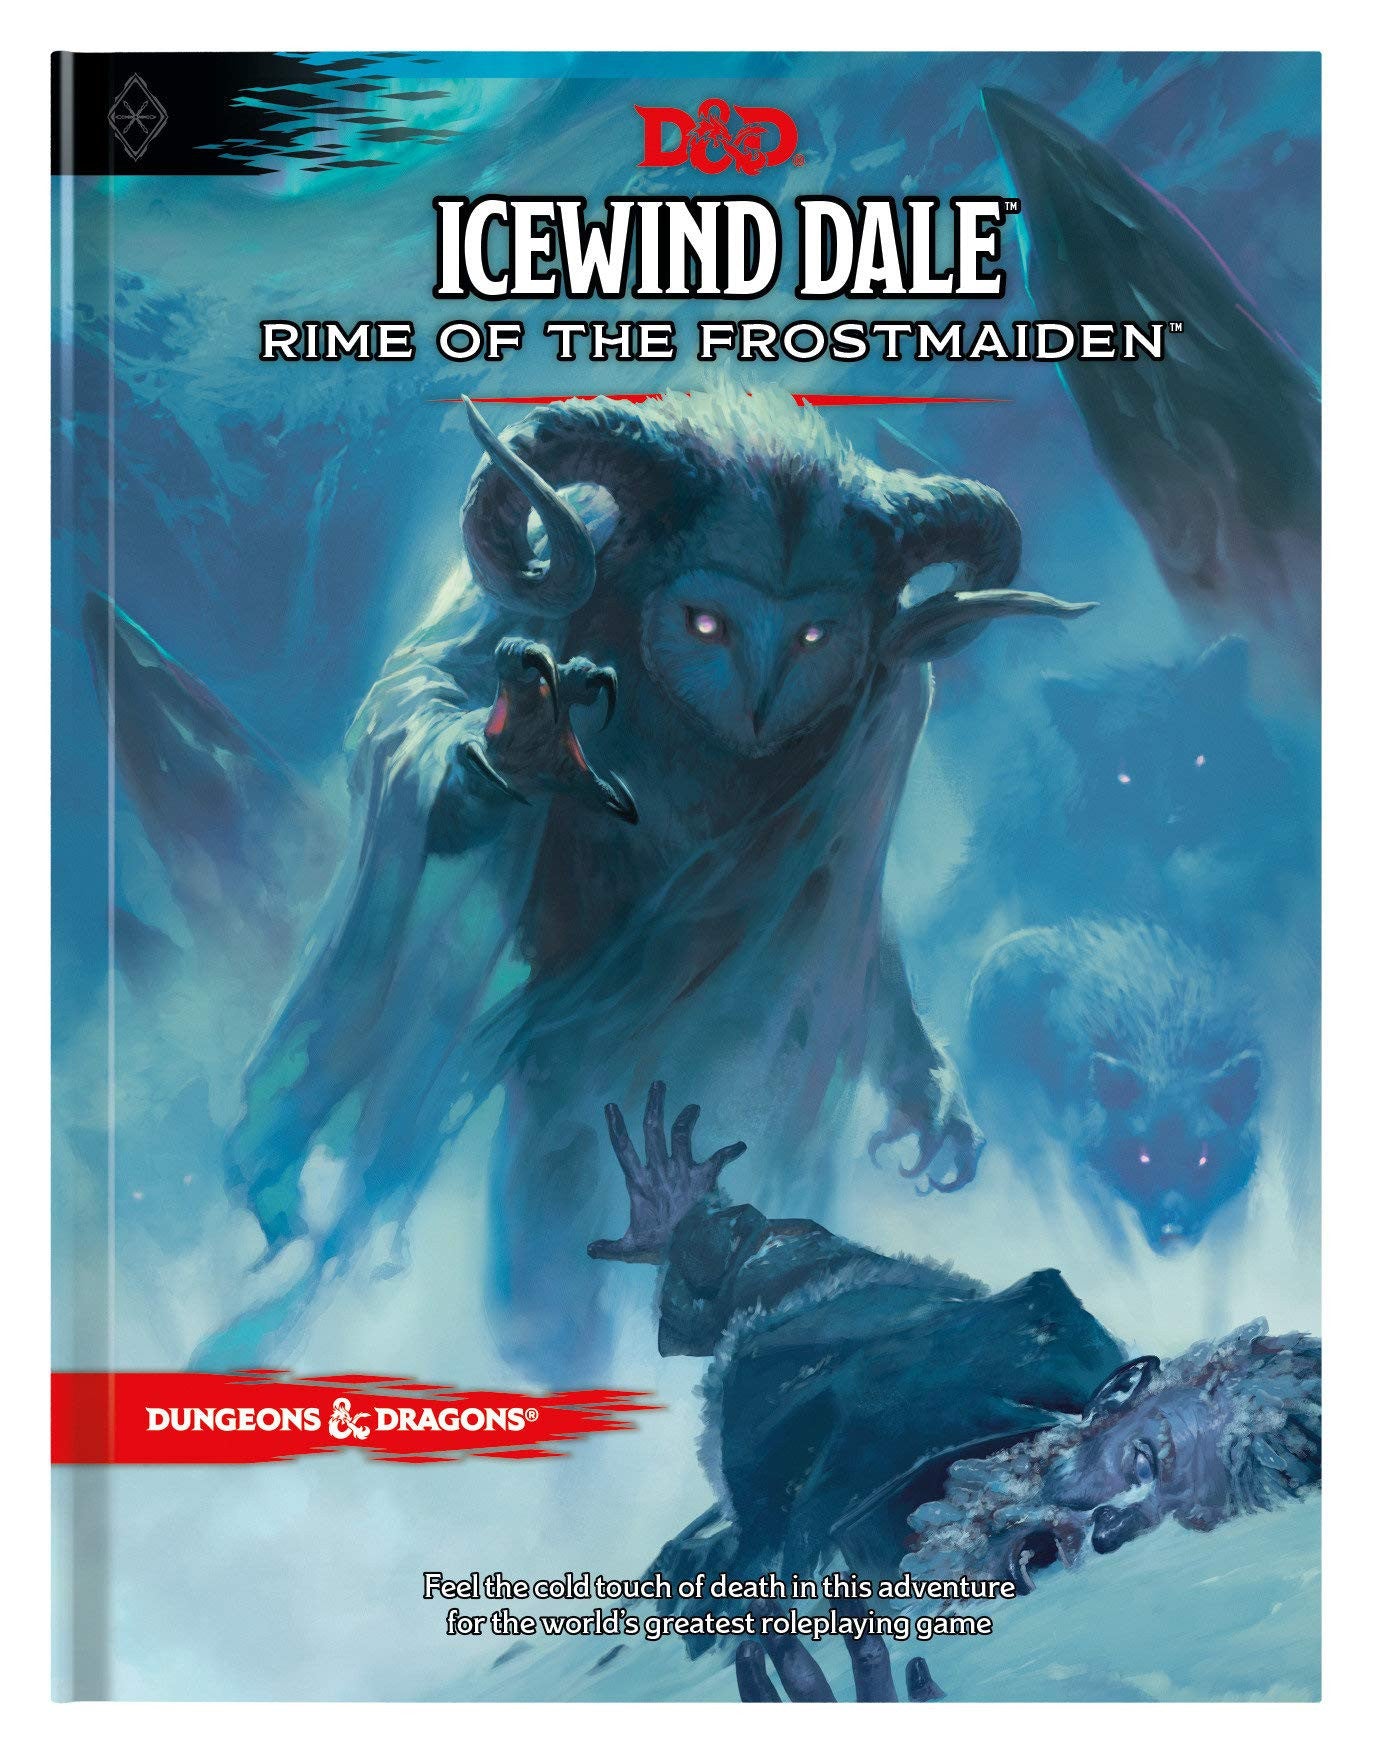 D&D Dungeons & Dragons Icewind Dale Rime of the Frostmaiden Hardcover